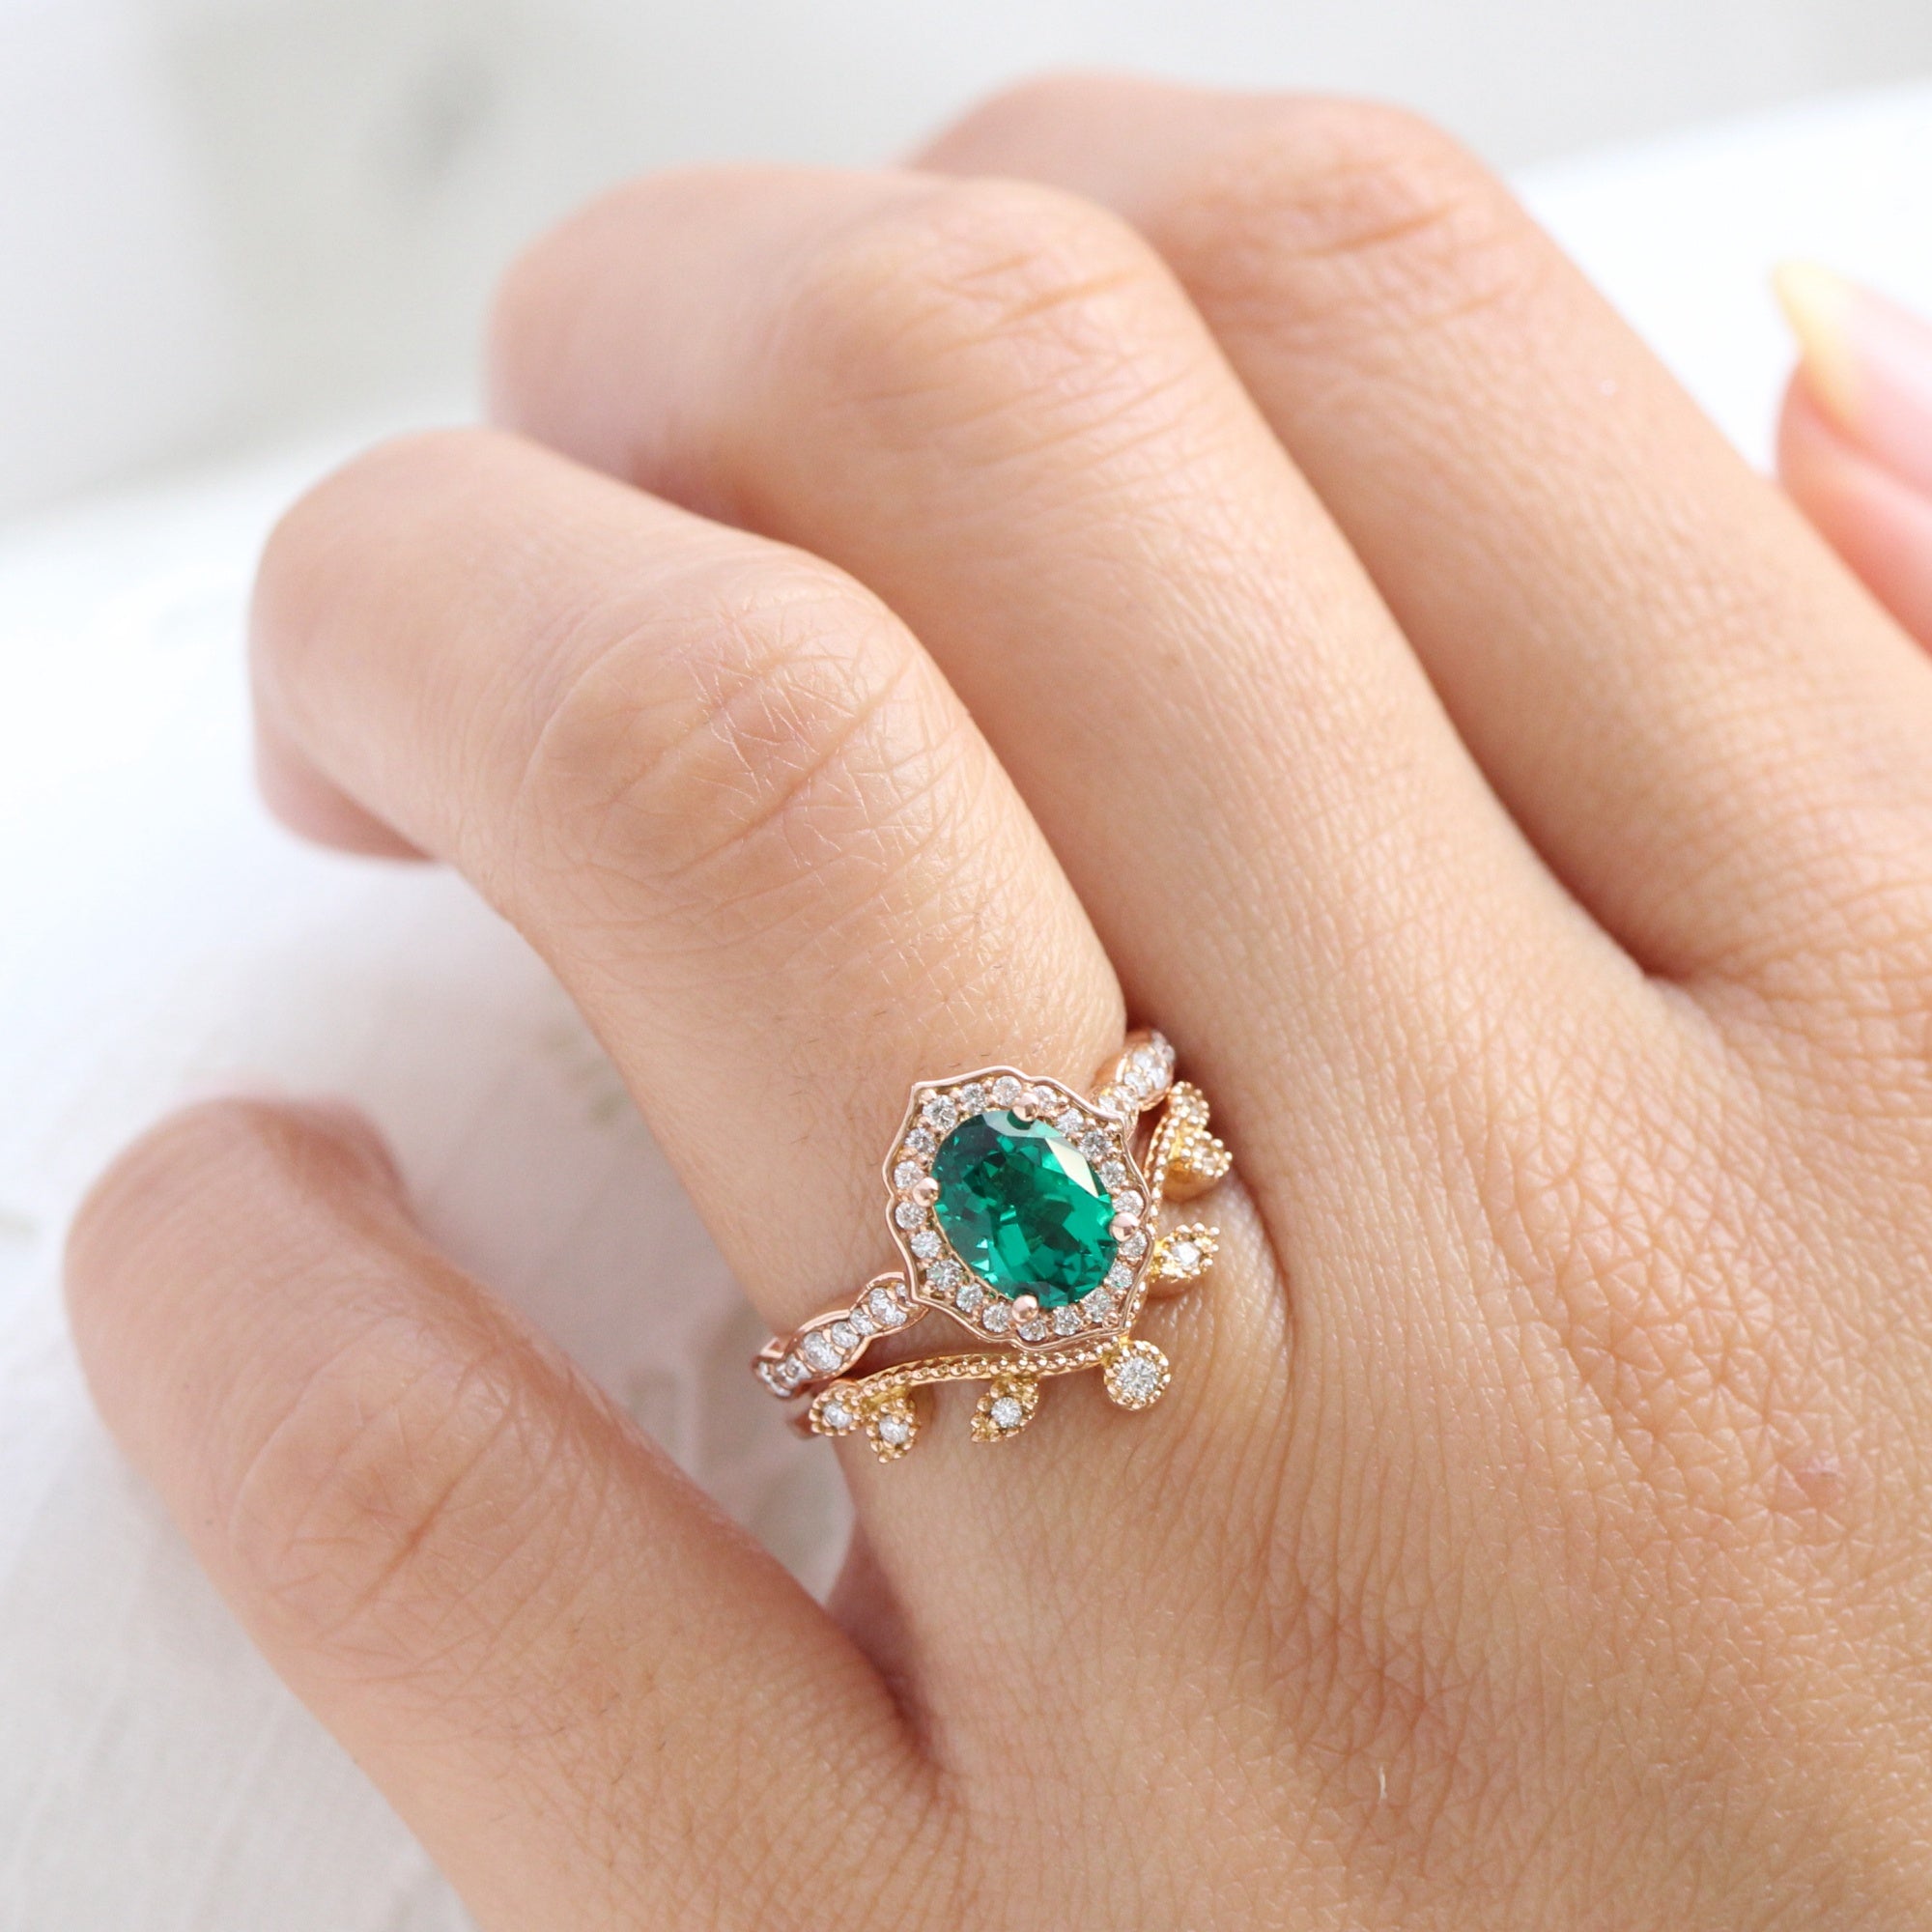 Vintage halo diamond emerald ring stack rose gold curved leaf band la more design jewelry